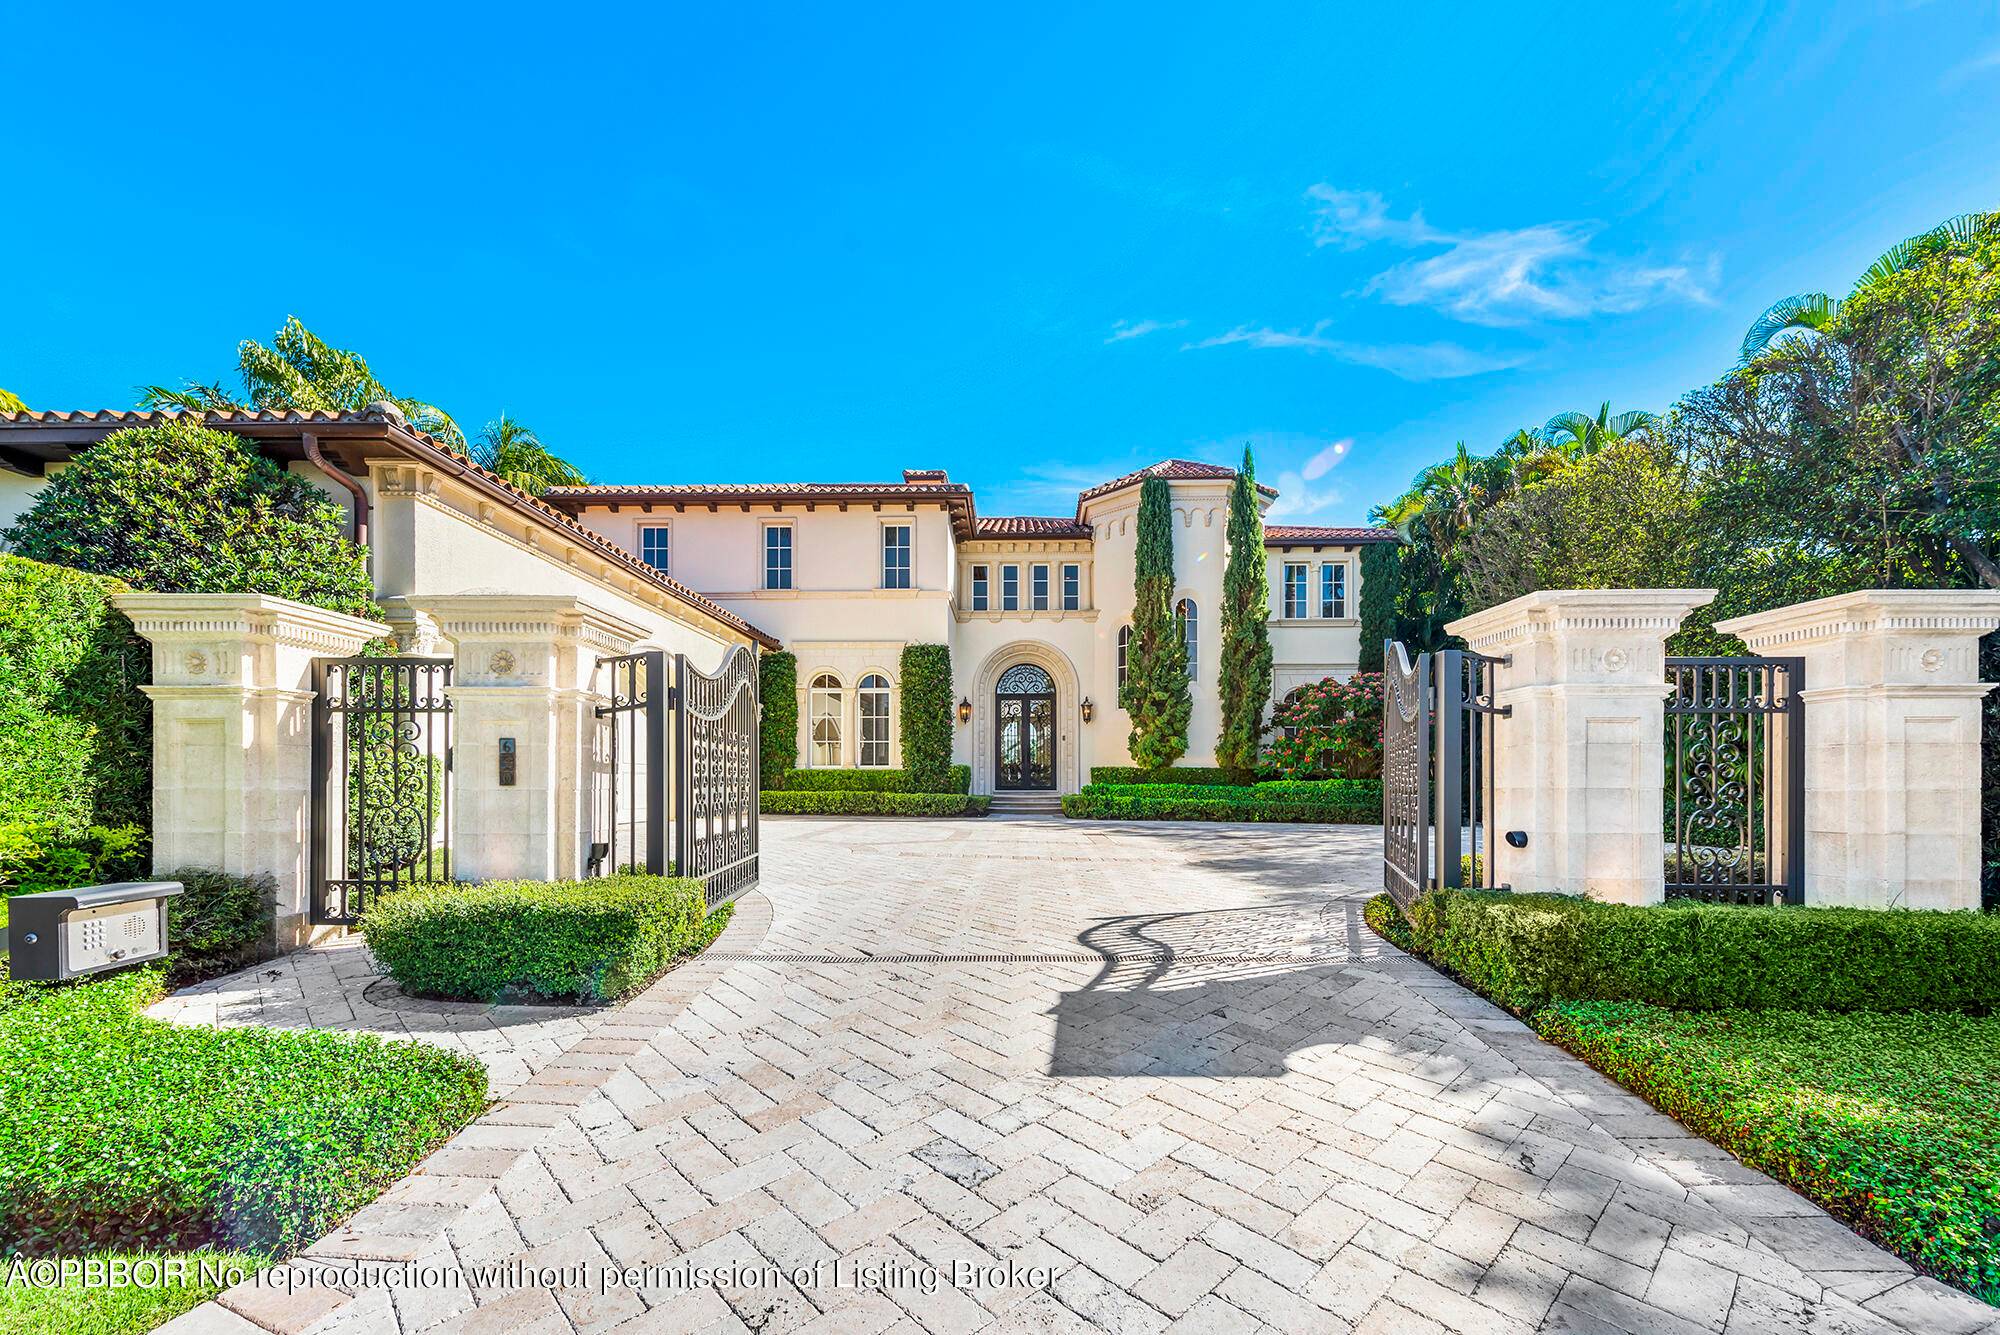 WELCOME HOME to modern elegance and serenity on esteemed Everglades Island, ideally located in the heart of Palm Beach.